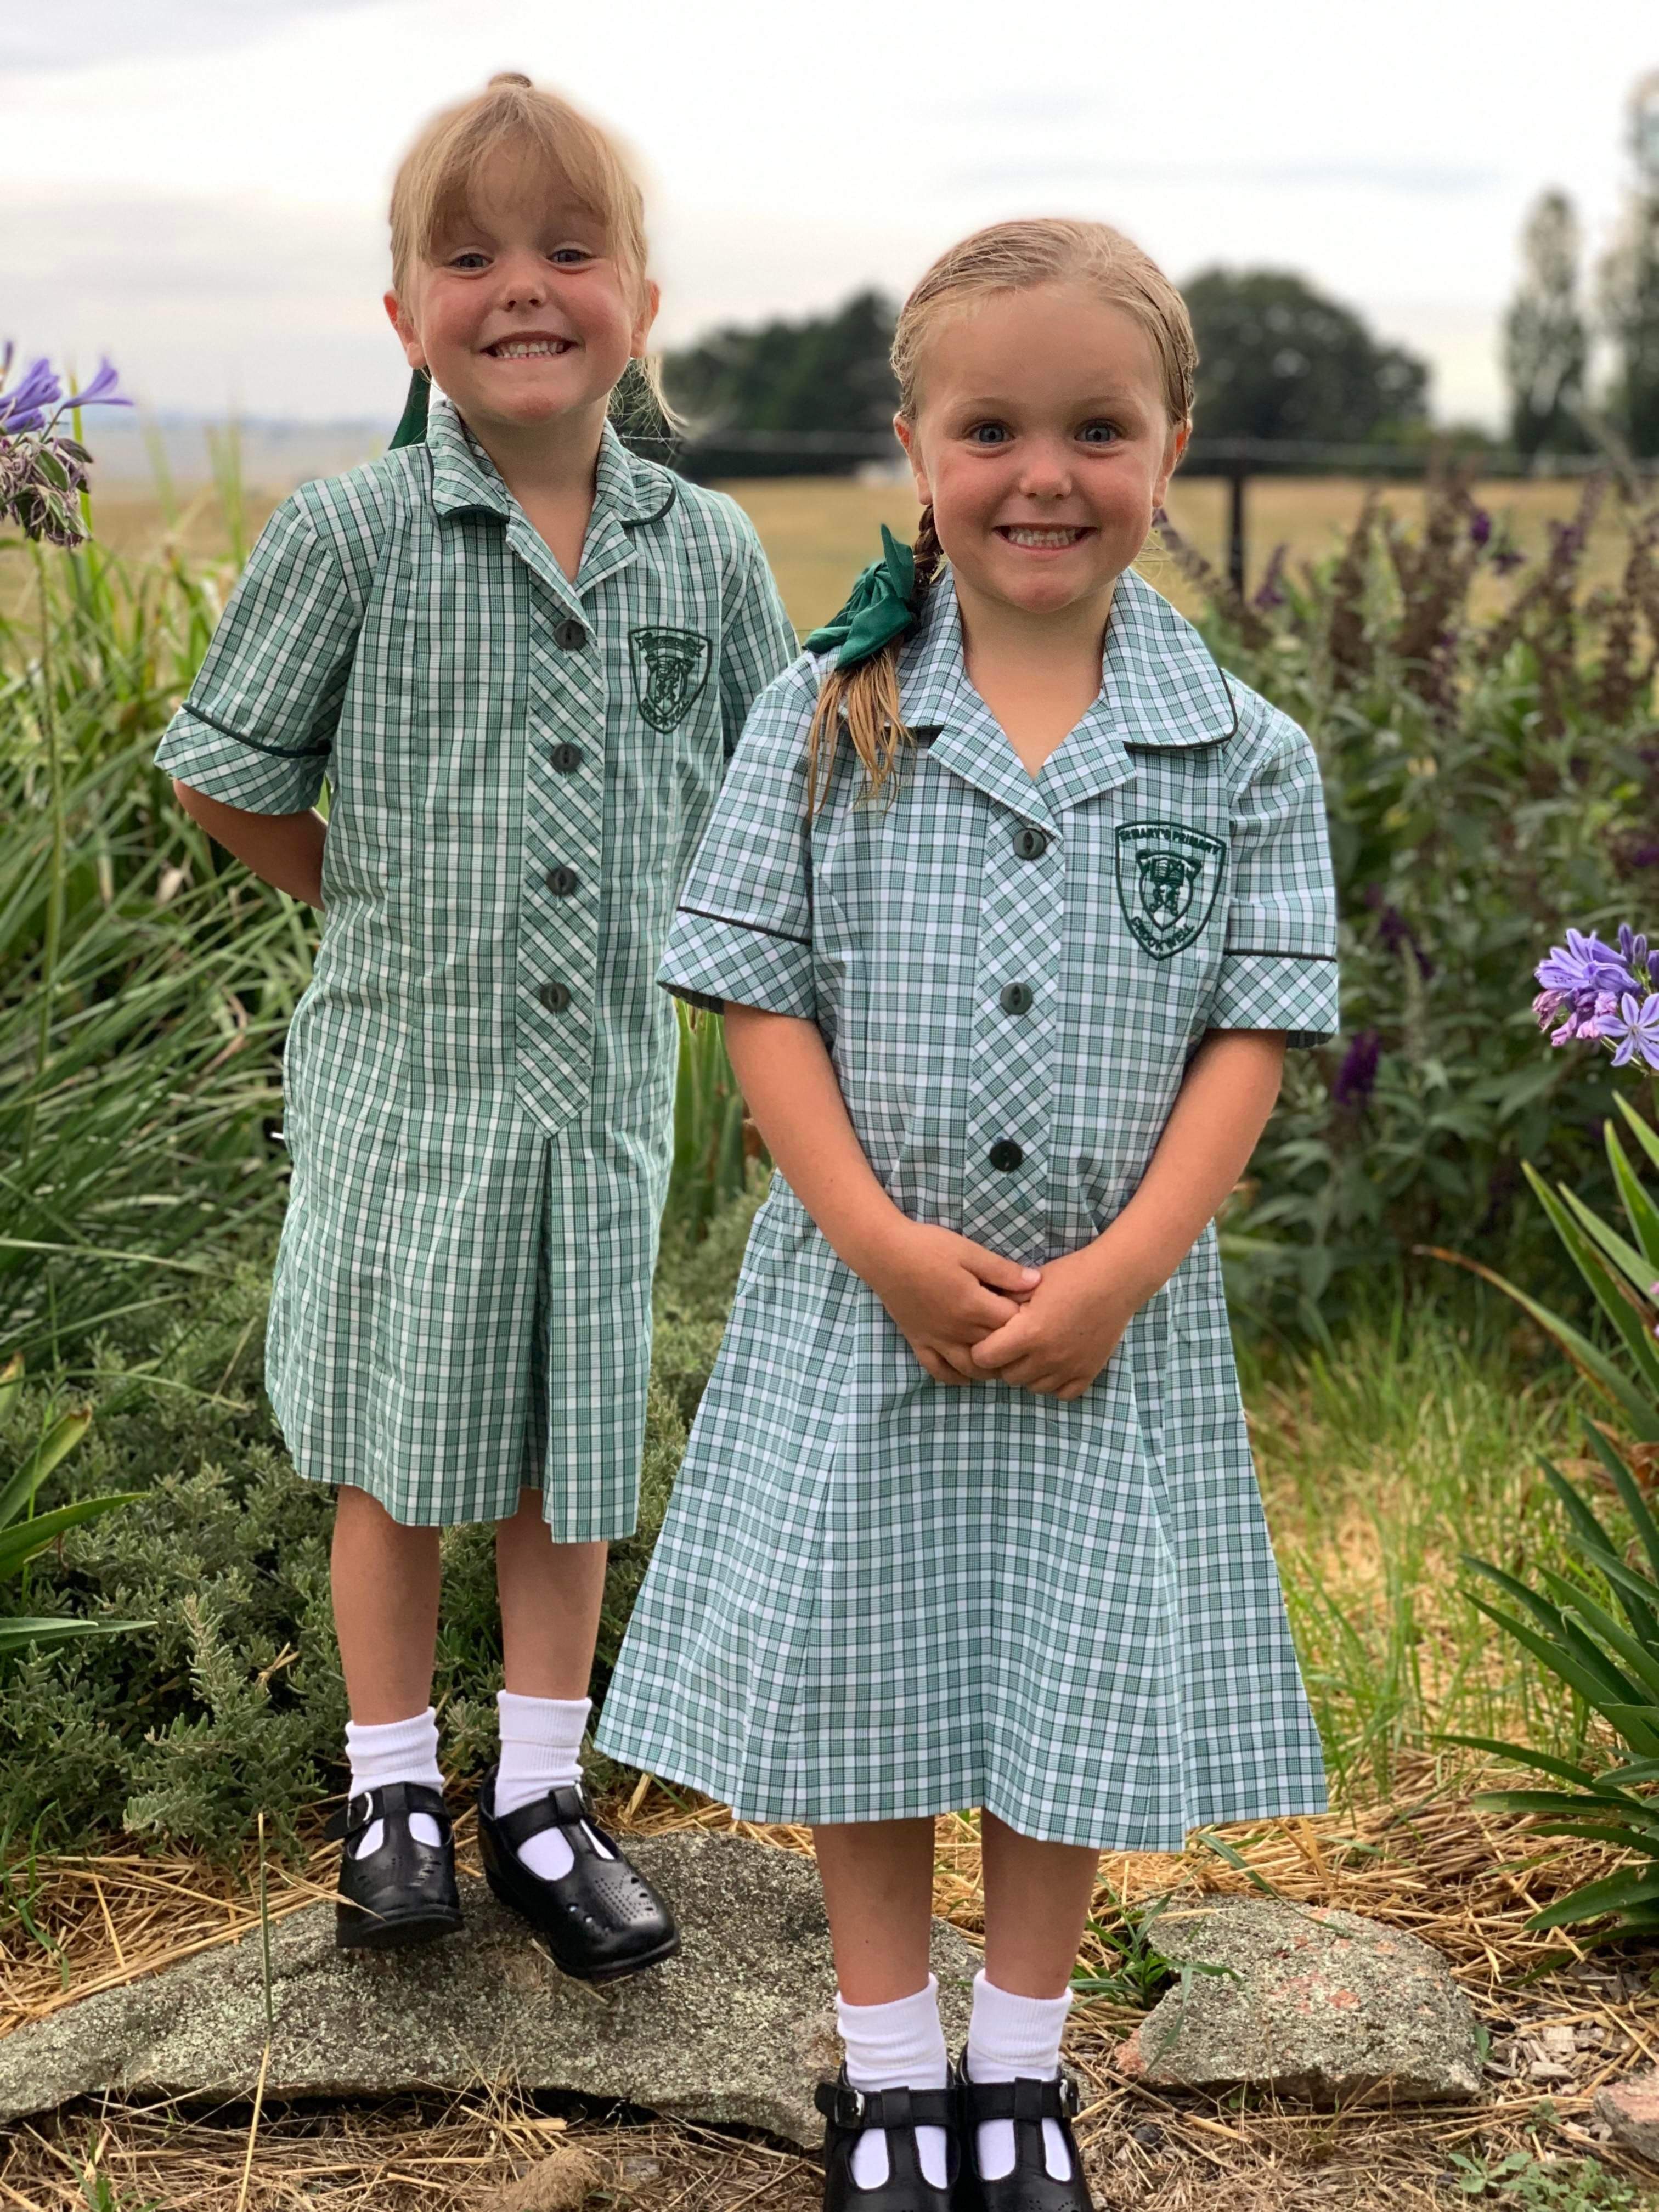 Double trouble or twice as nice? Crookwell's St Mary's Primary School welcomes three sets of twins